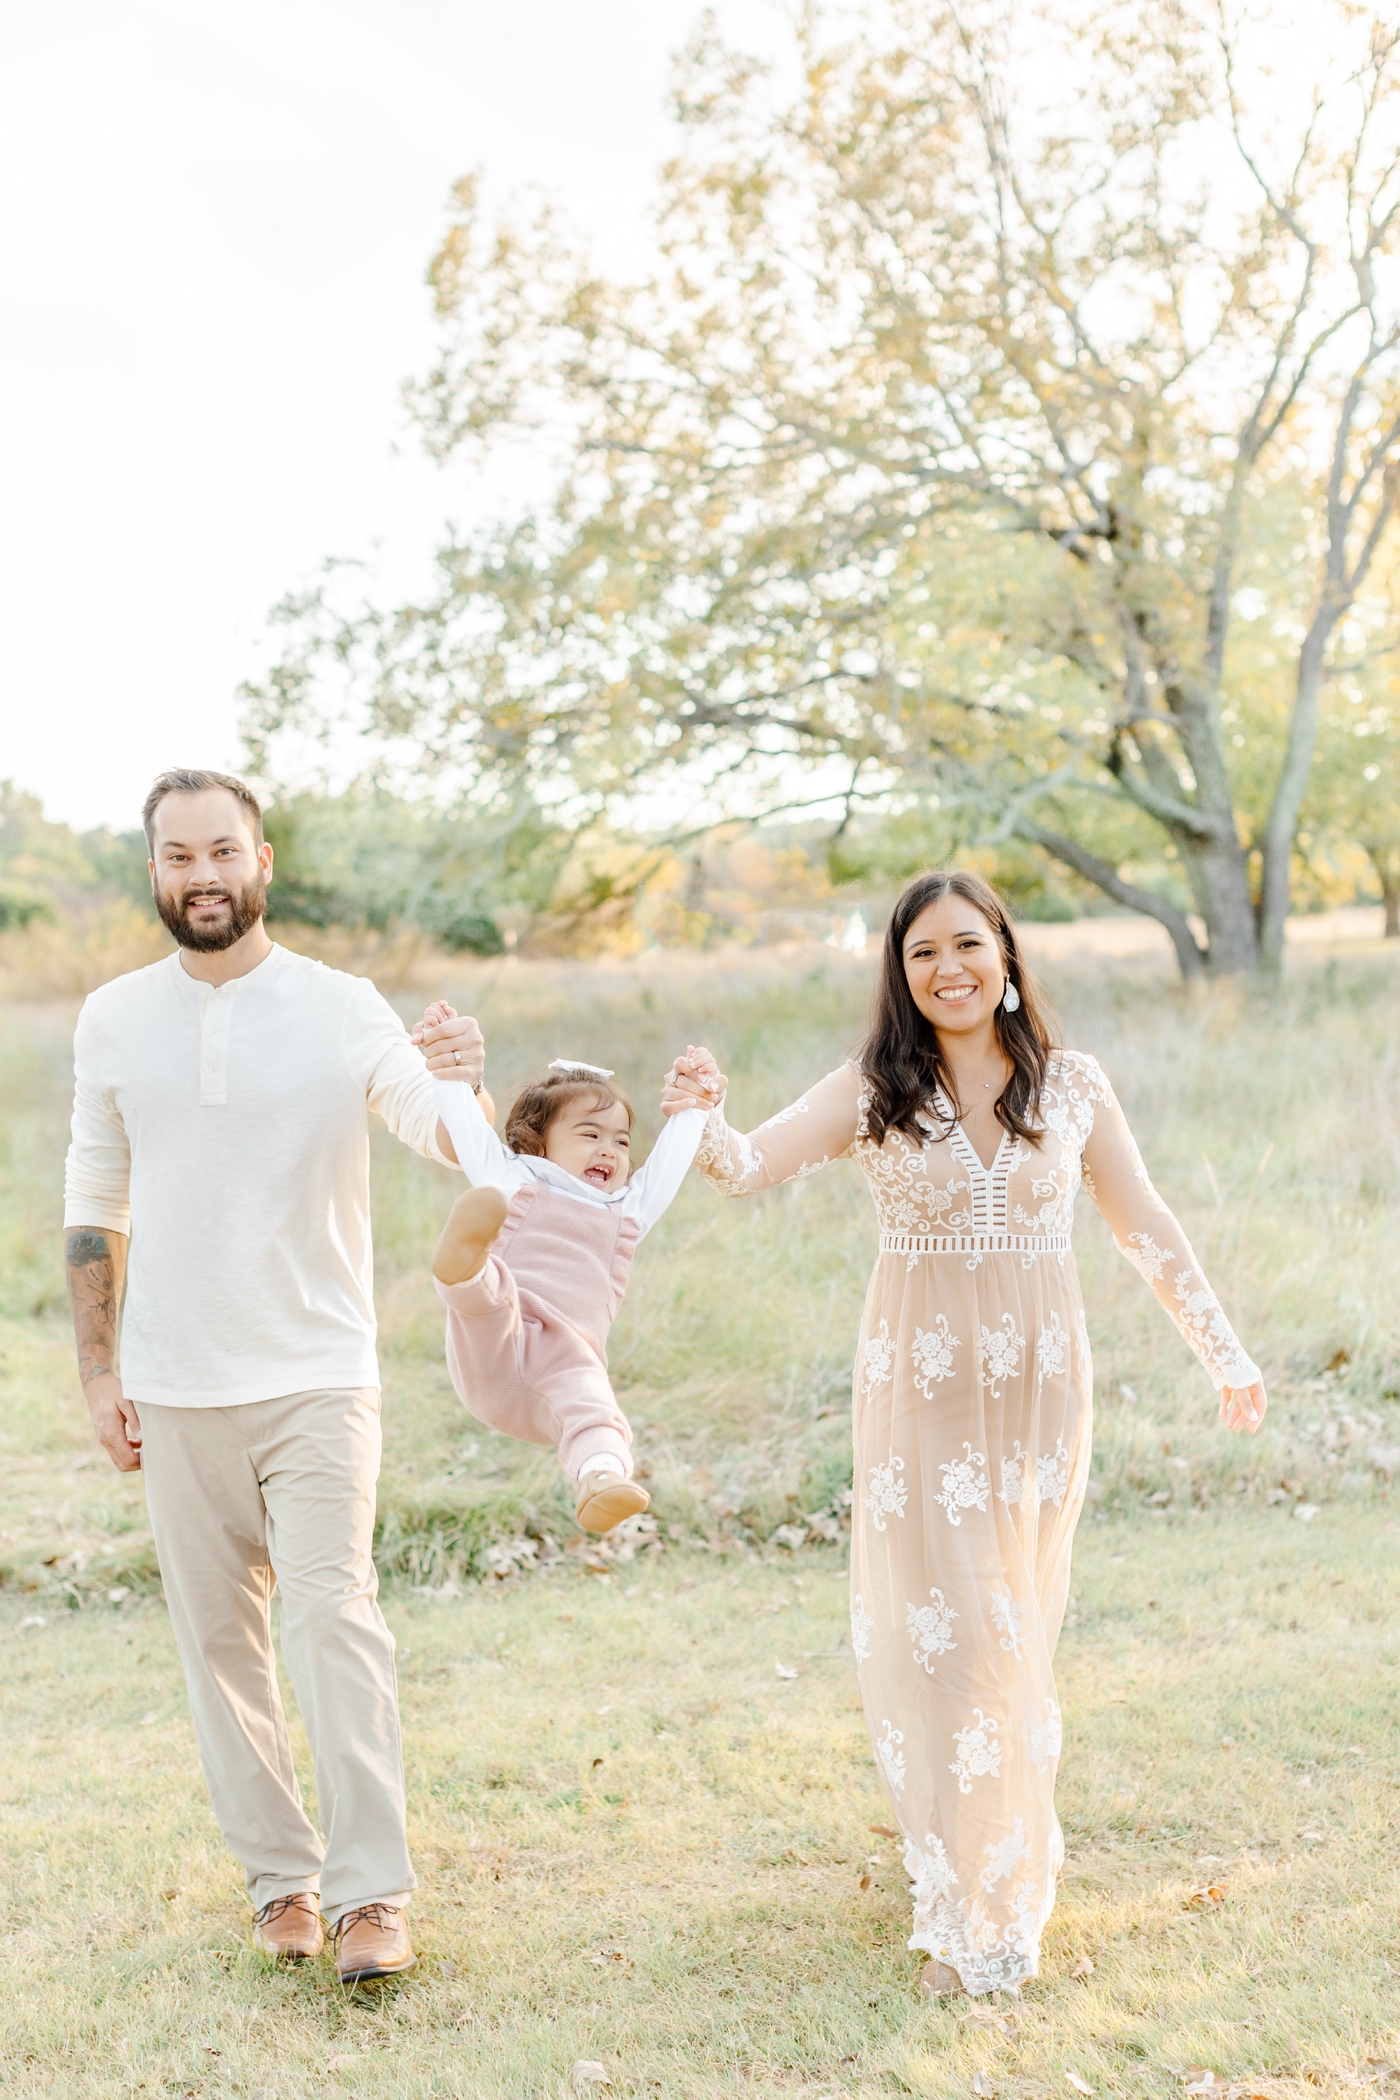 Playful image of parents swinging little girl as they walk in Austin, TX park during family session with by Sana Ahmed Photography.